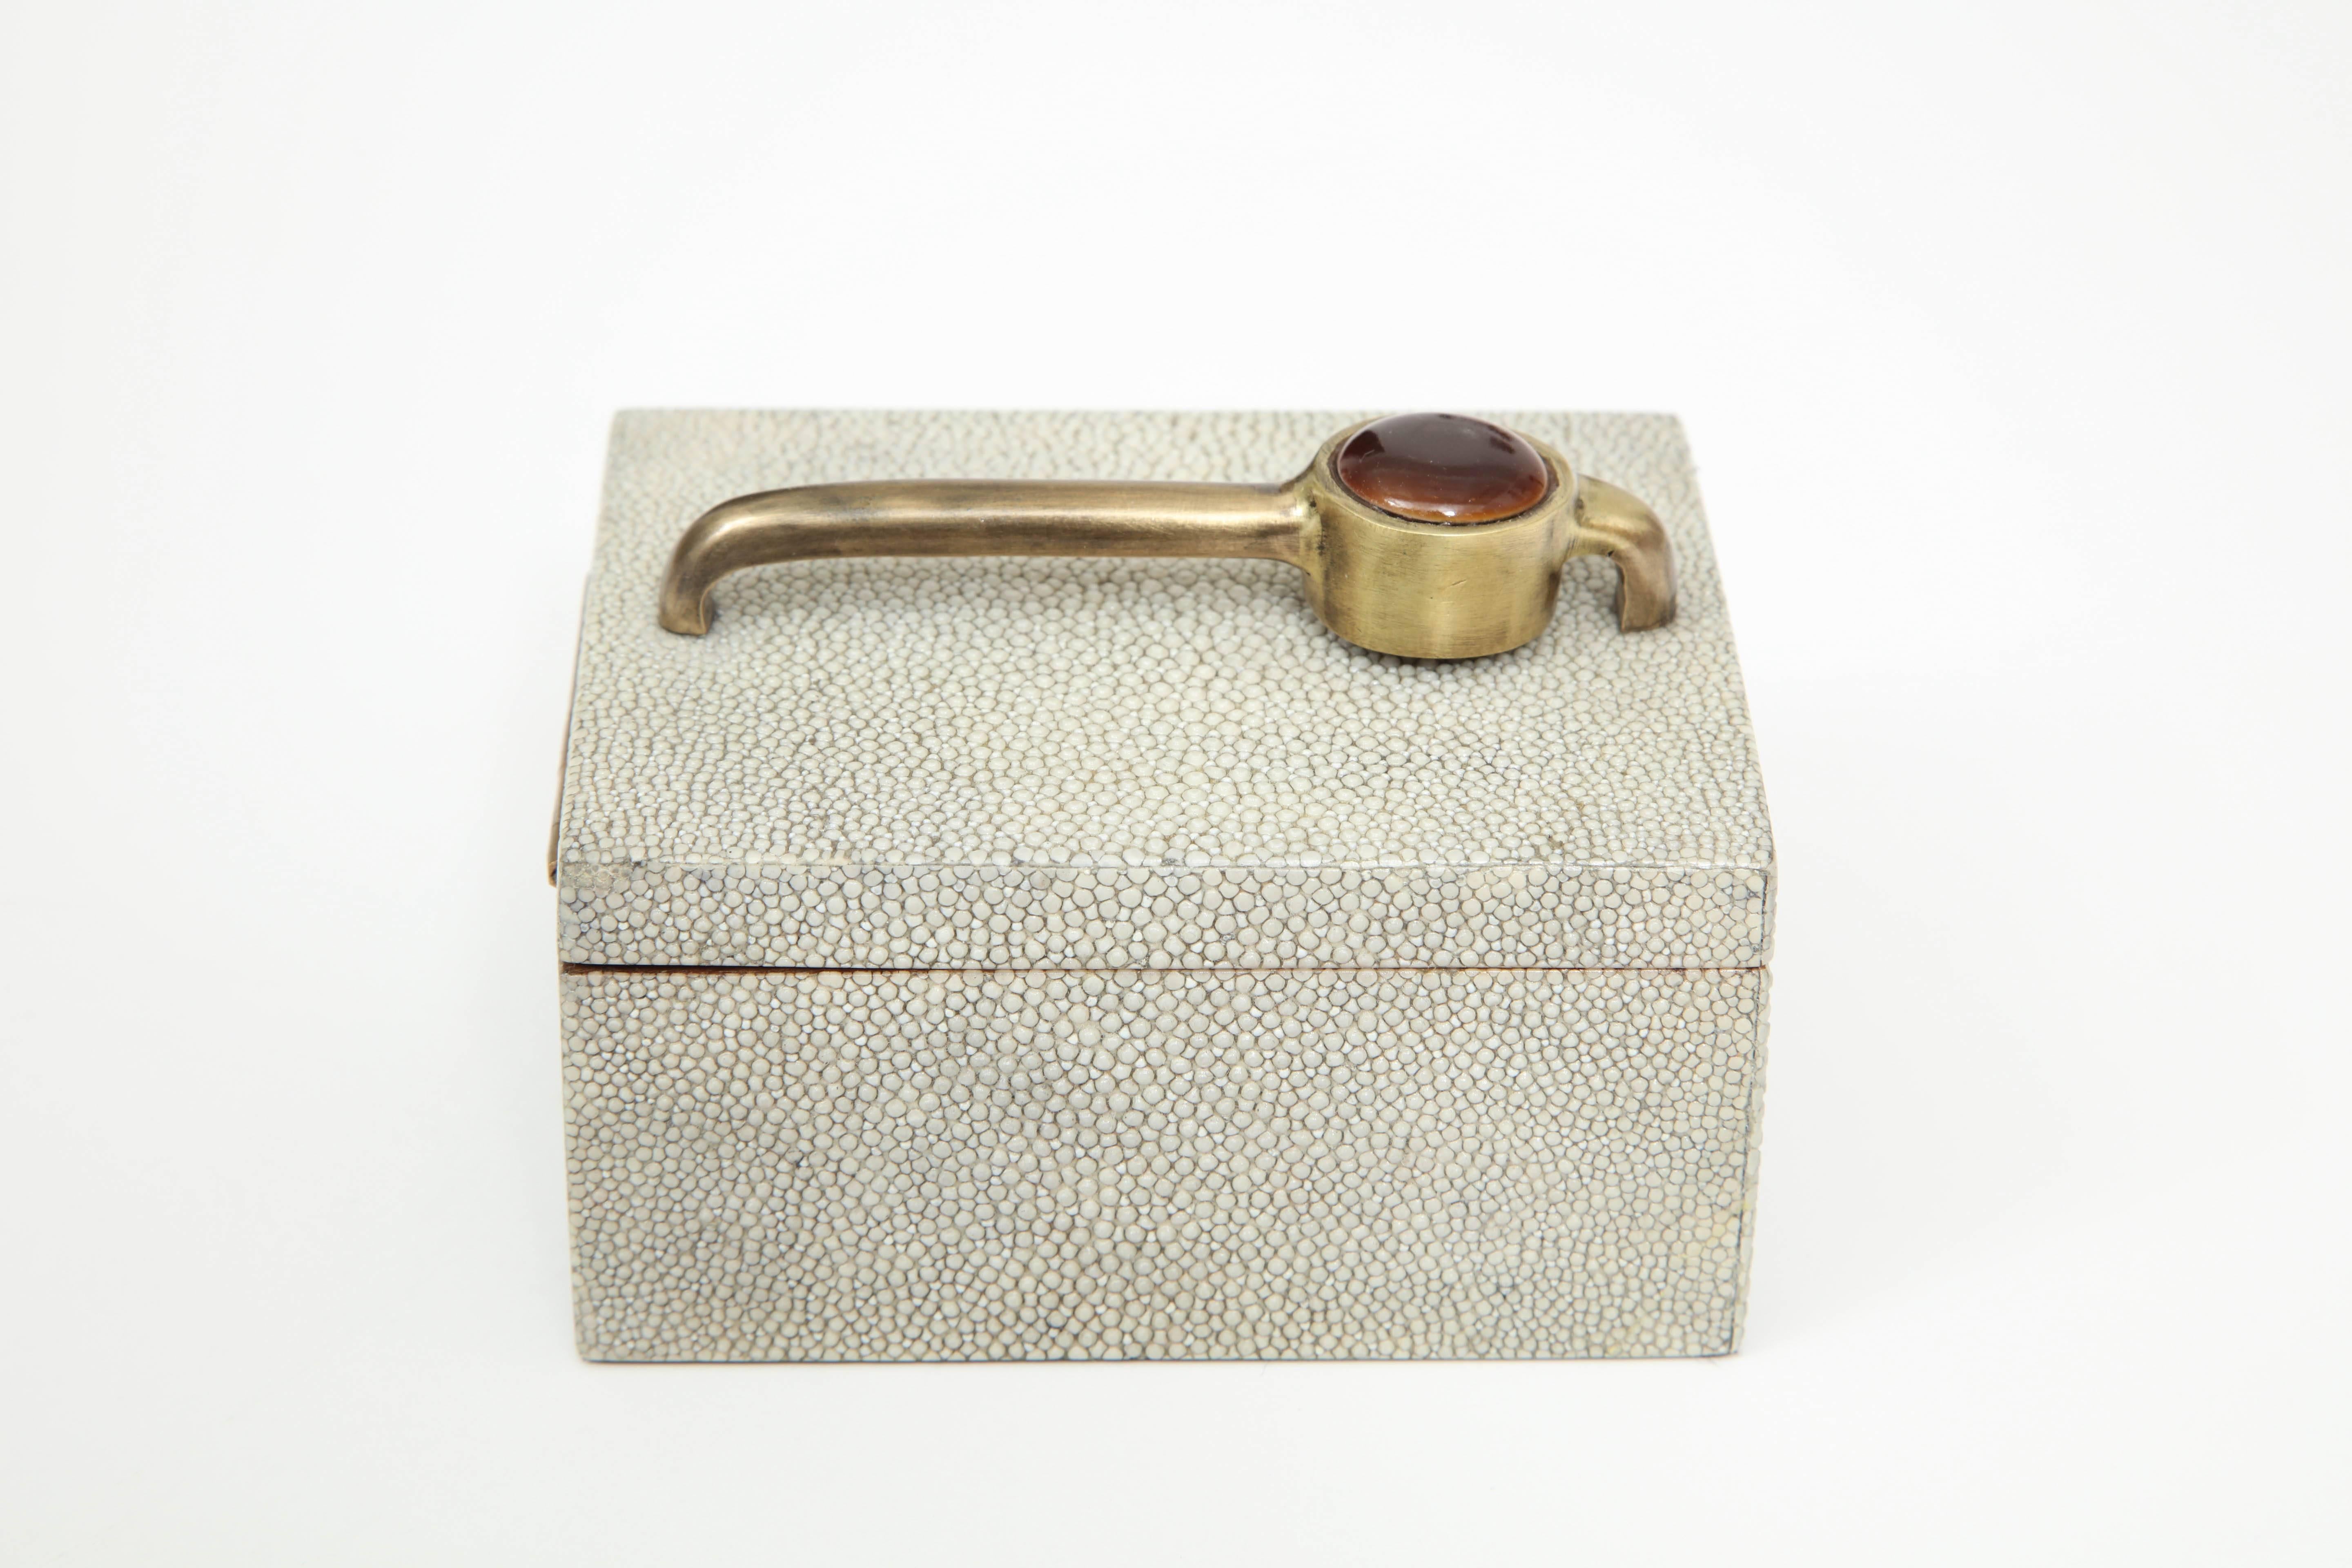 Decorative shagreen box with bronze handle. The inside of the box has a bronze lining.